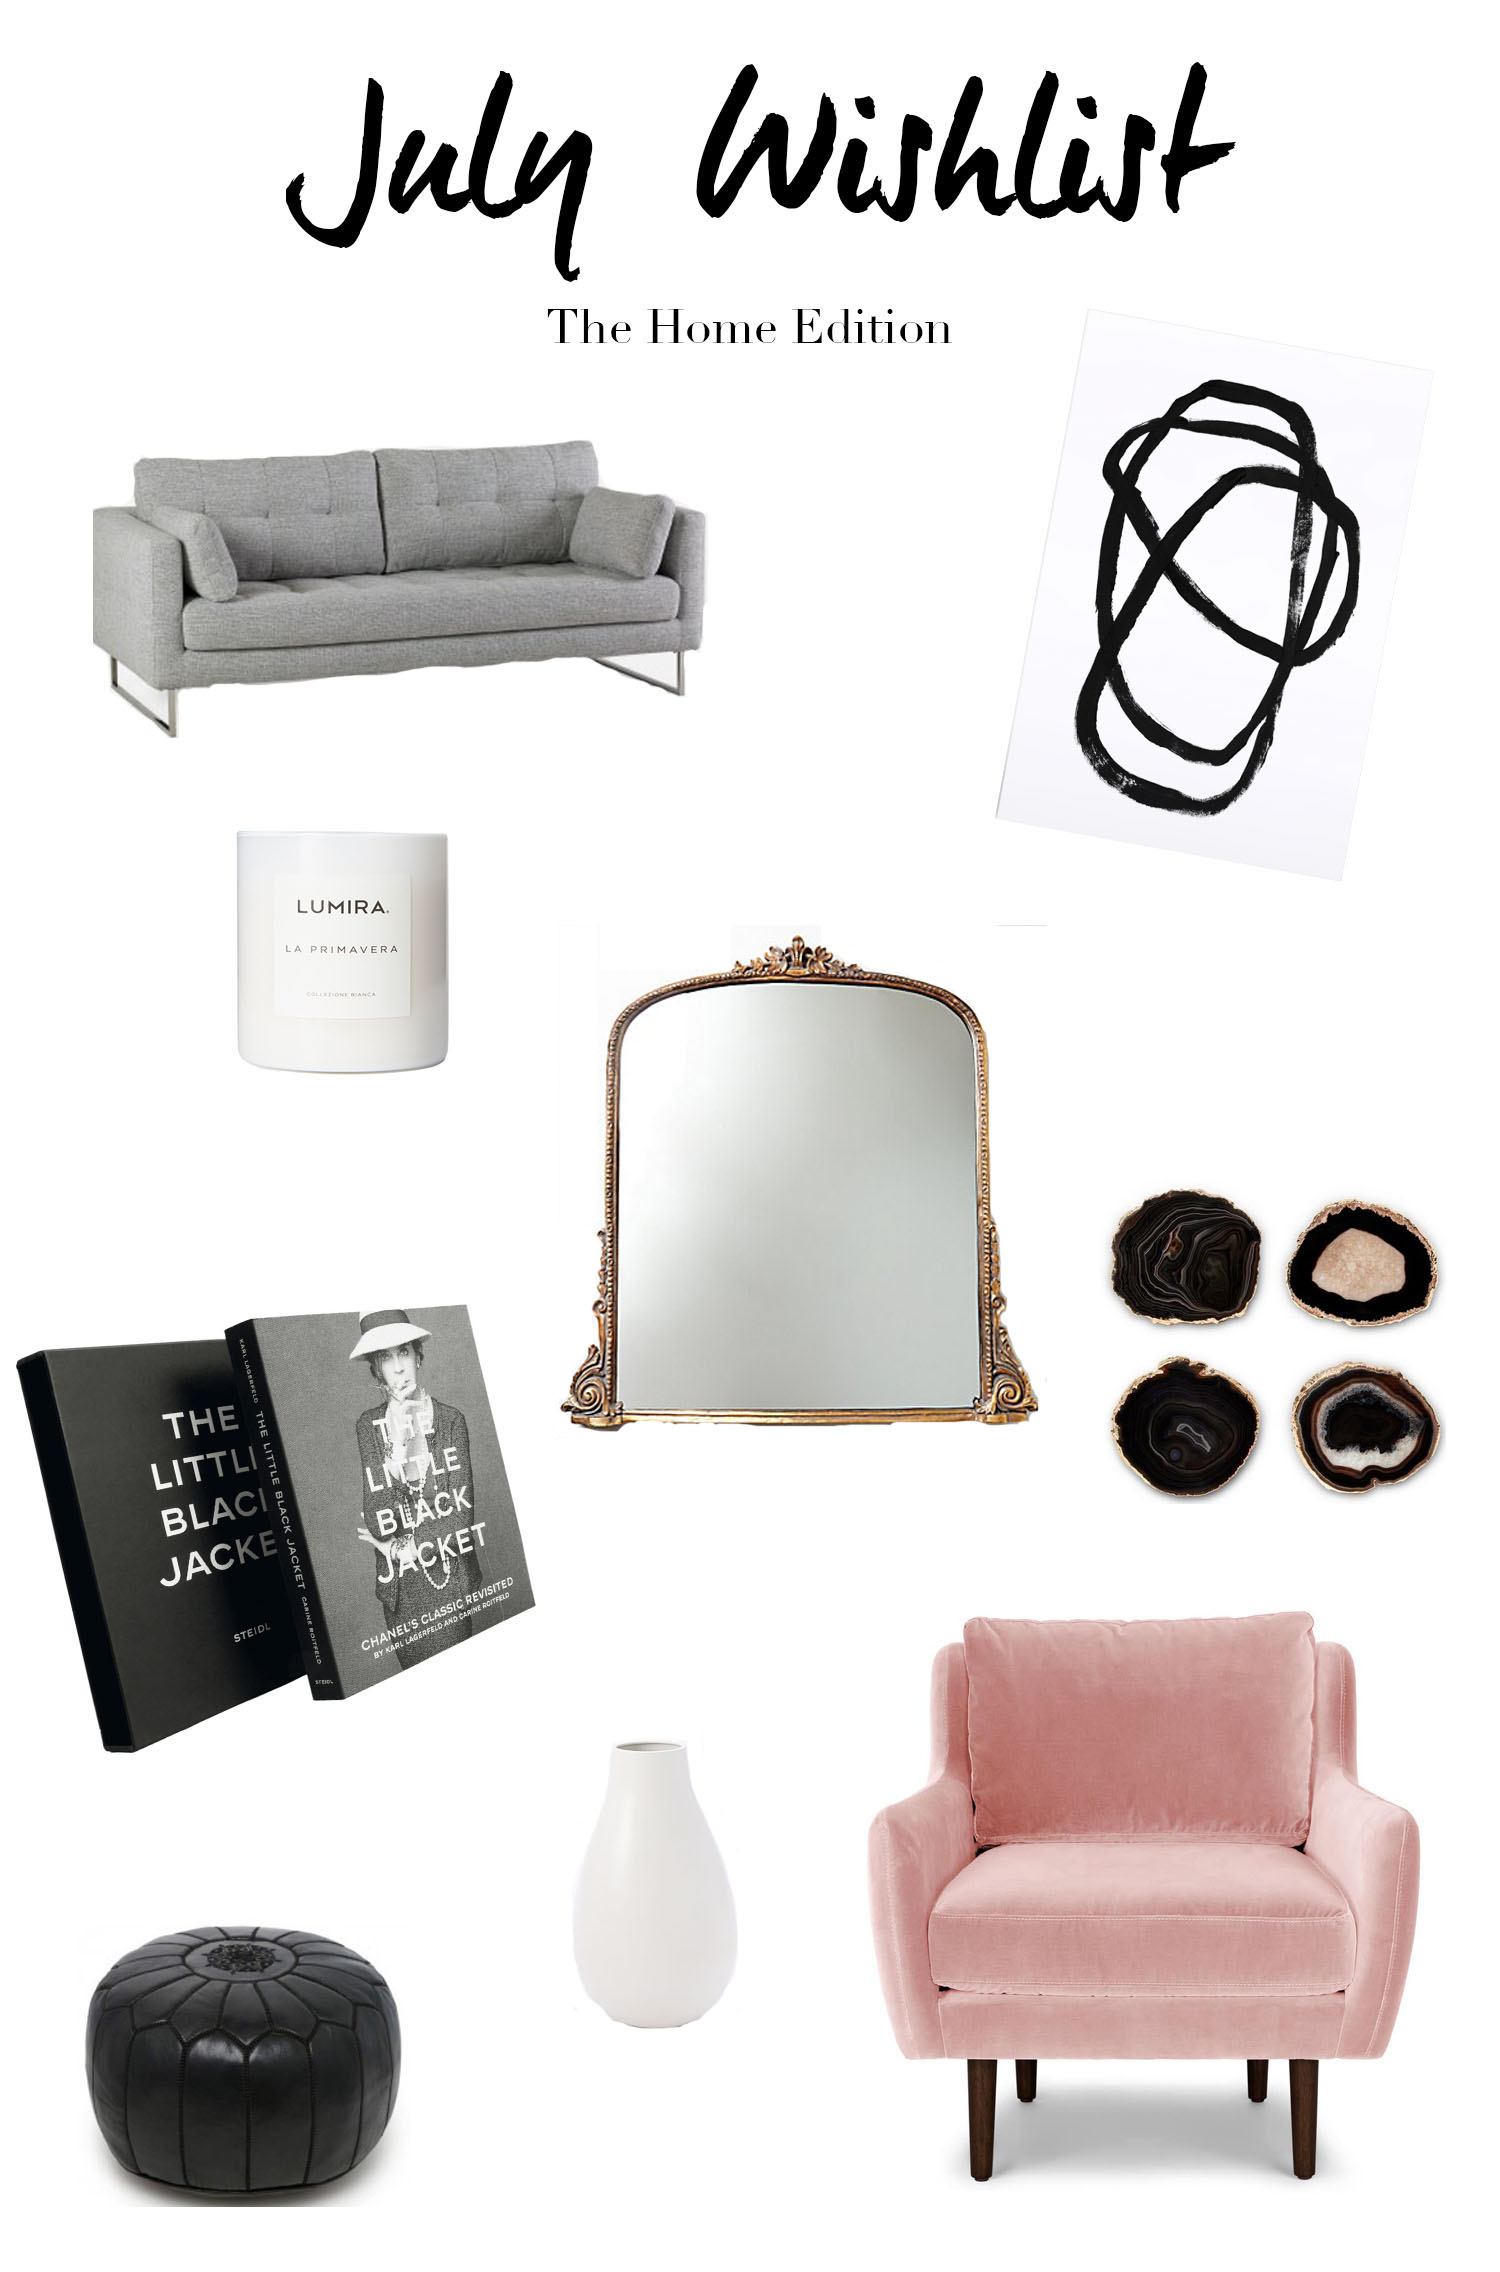 A July 2017 home decor shopping list including furniture from Article, Structure and Anthropologie, assembled by fashion blogger Cee Fardoe of Coco & Vera